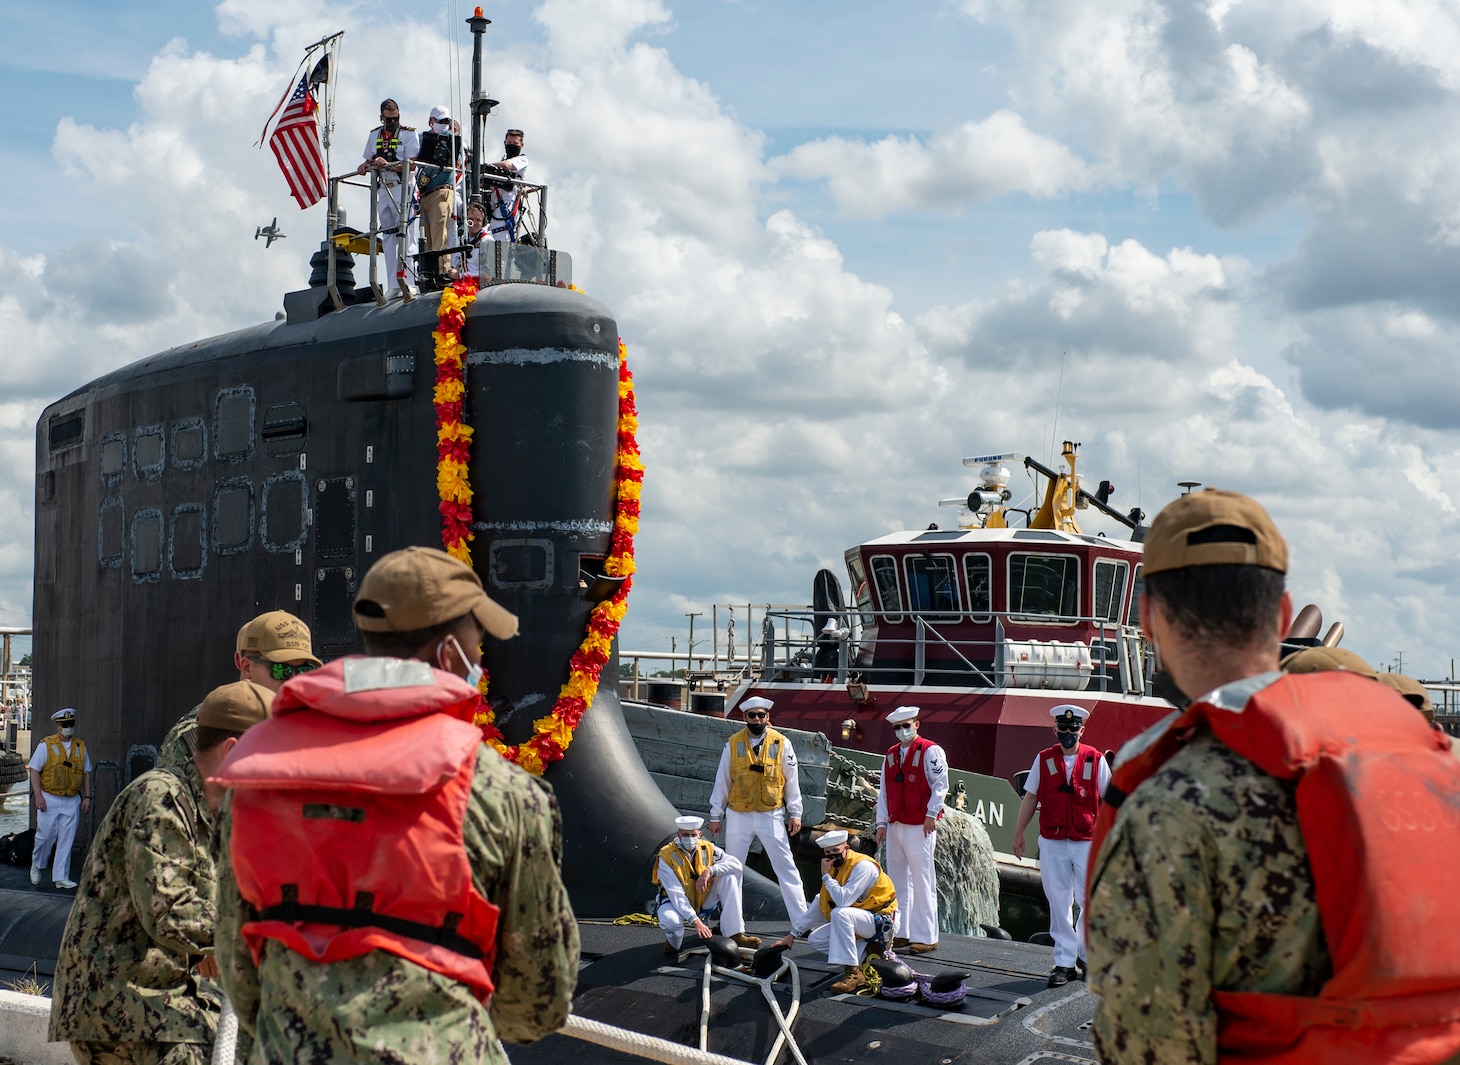 The Virginia-class fast-attack submarine USS New Mexico (SSN 779) returns to its homeport at Naval Station Norfolk, Sept. 15, 2021.